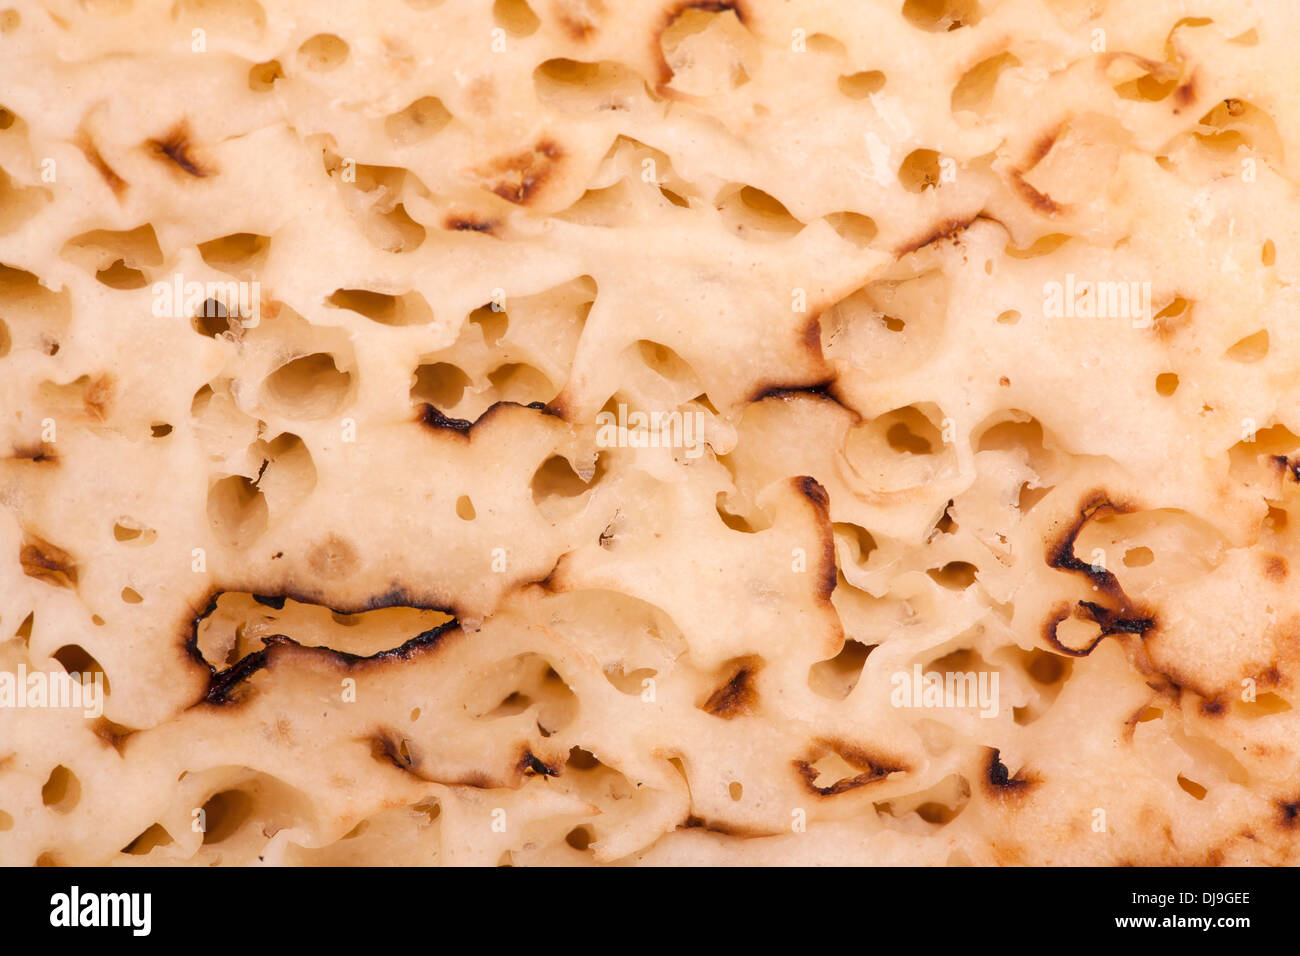 Crumpet macro abstract background texture Stock Photo